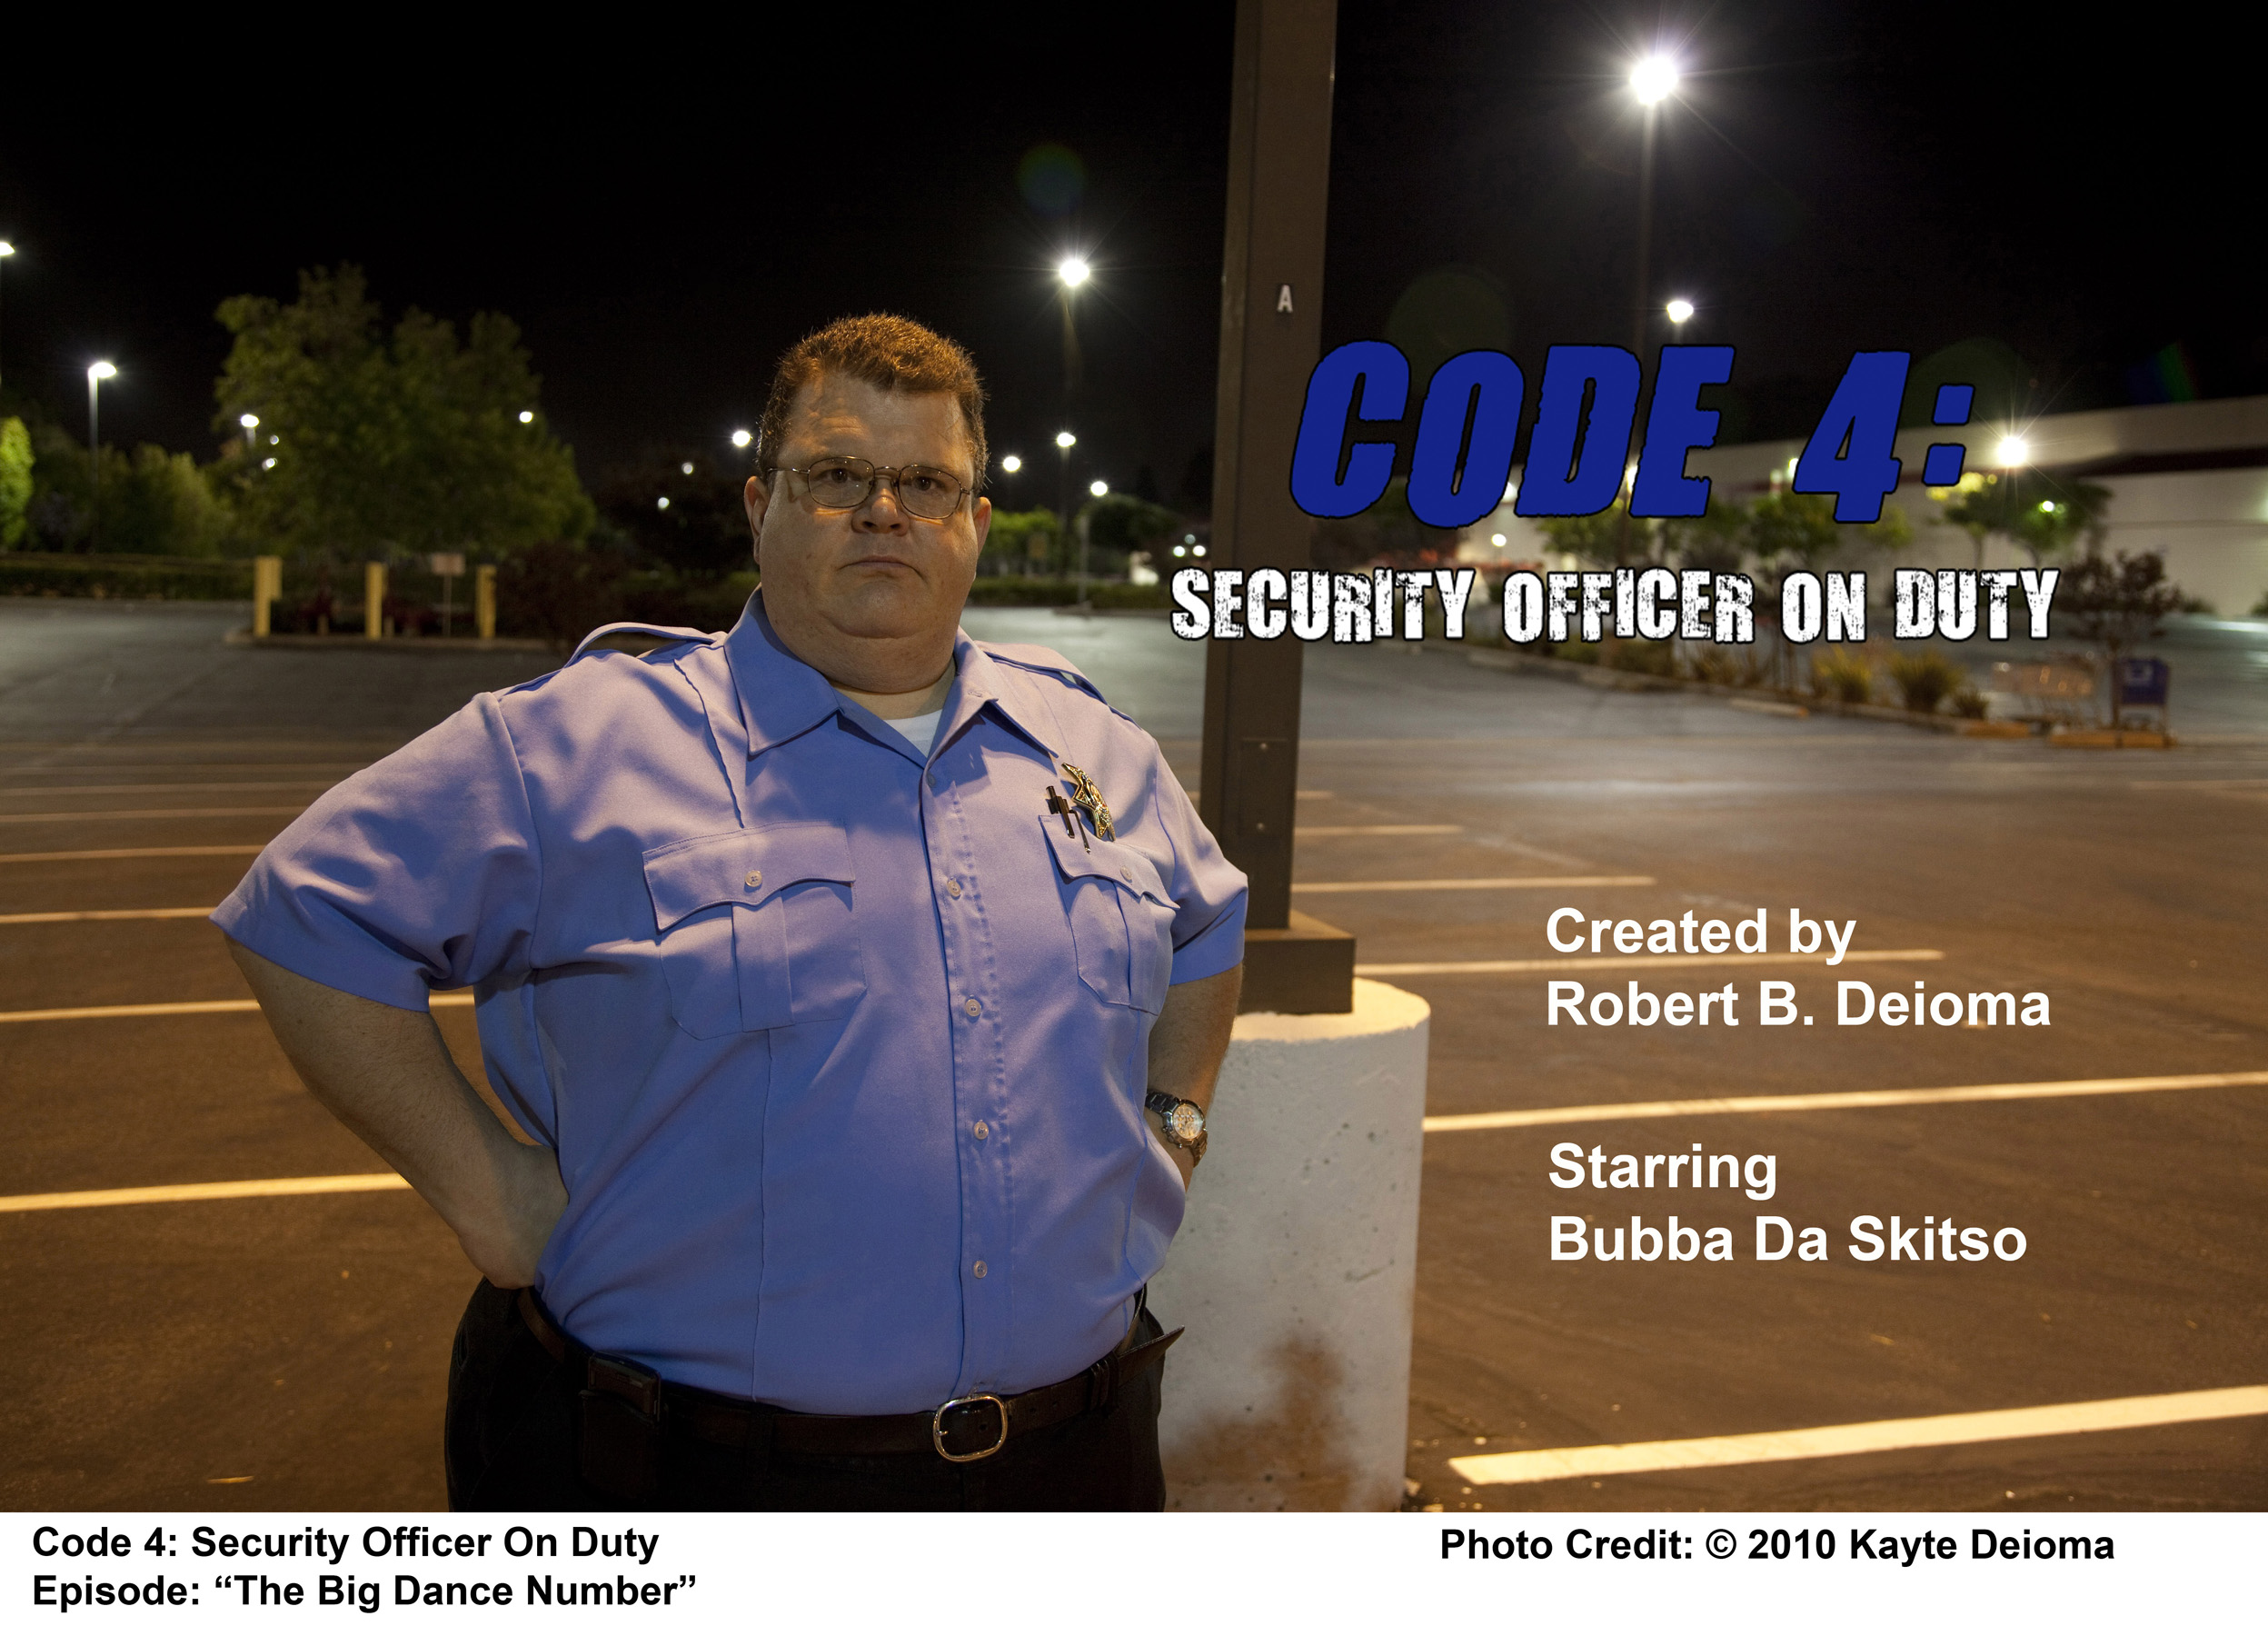 Code 4 Security Officer on Duty: Film Festival Poster